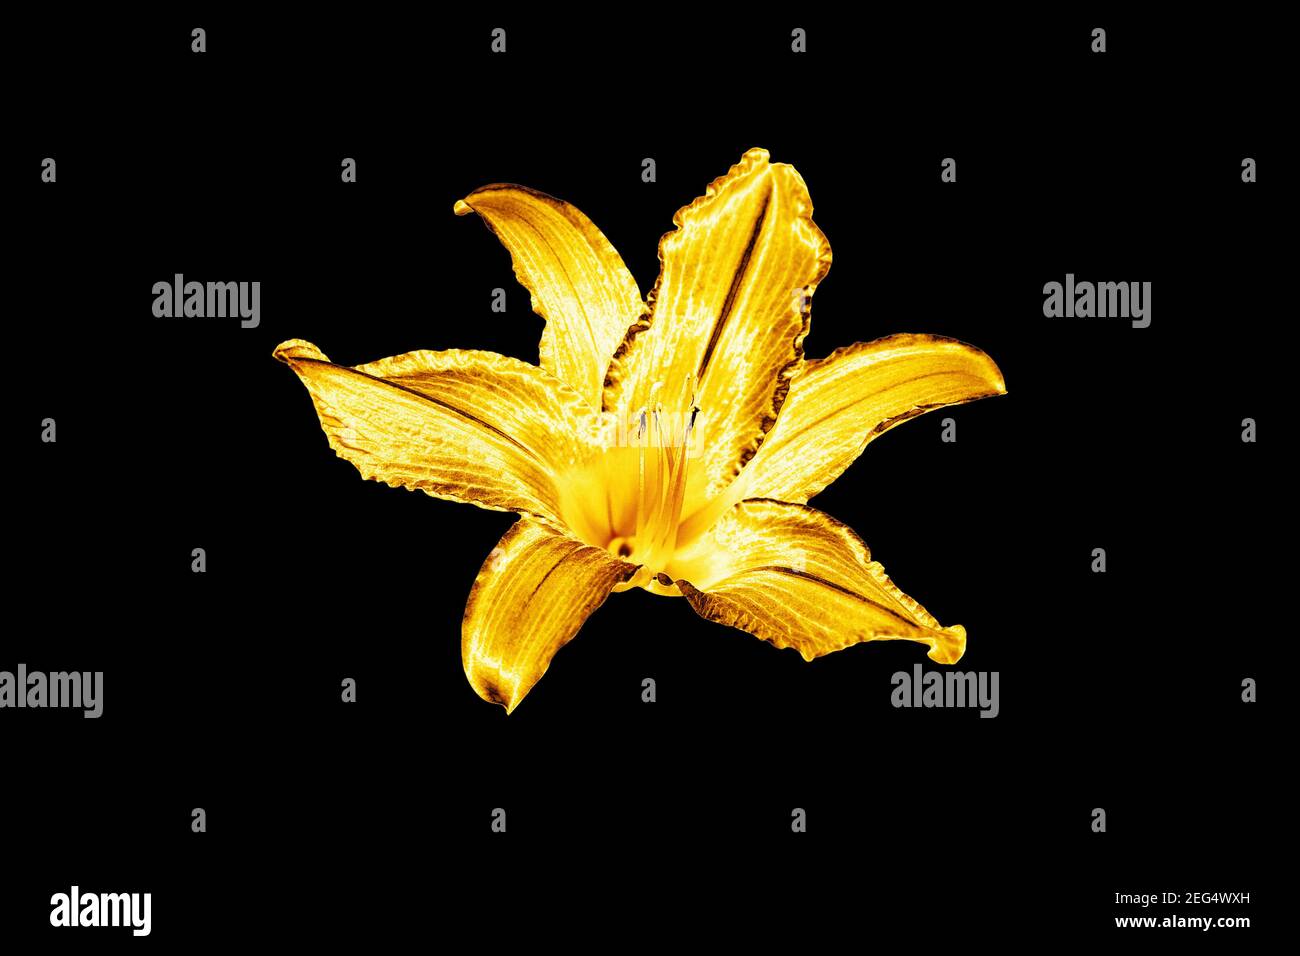 One golden lily flower black background isolated close up, beautiful single gold metal lilly, shiny yellow metallic floral pattern, design  element Stock Photo